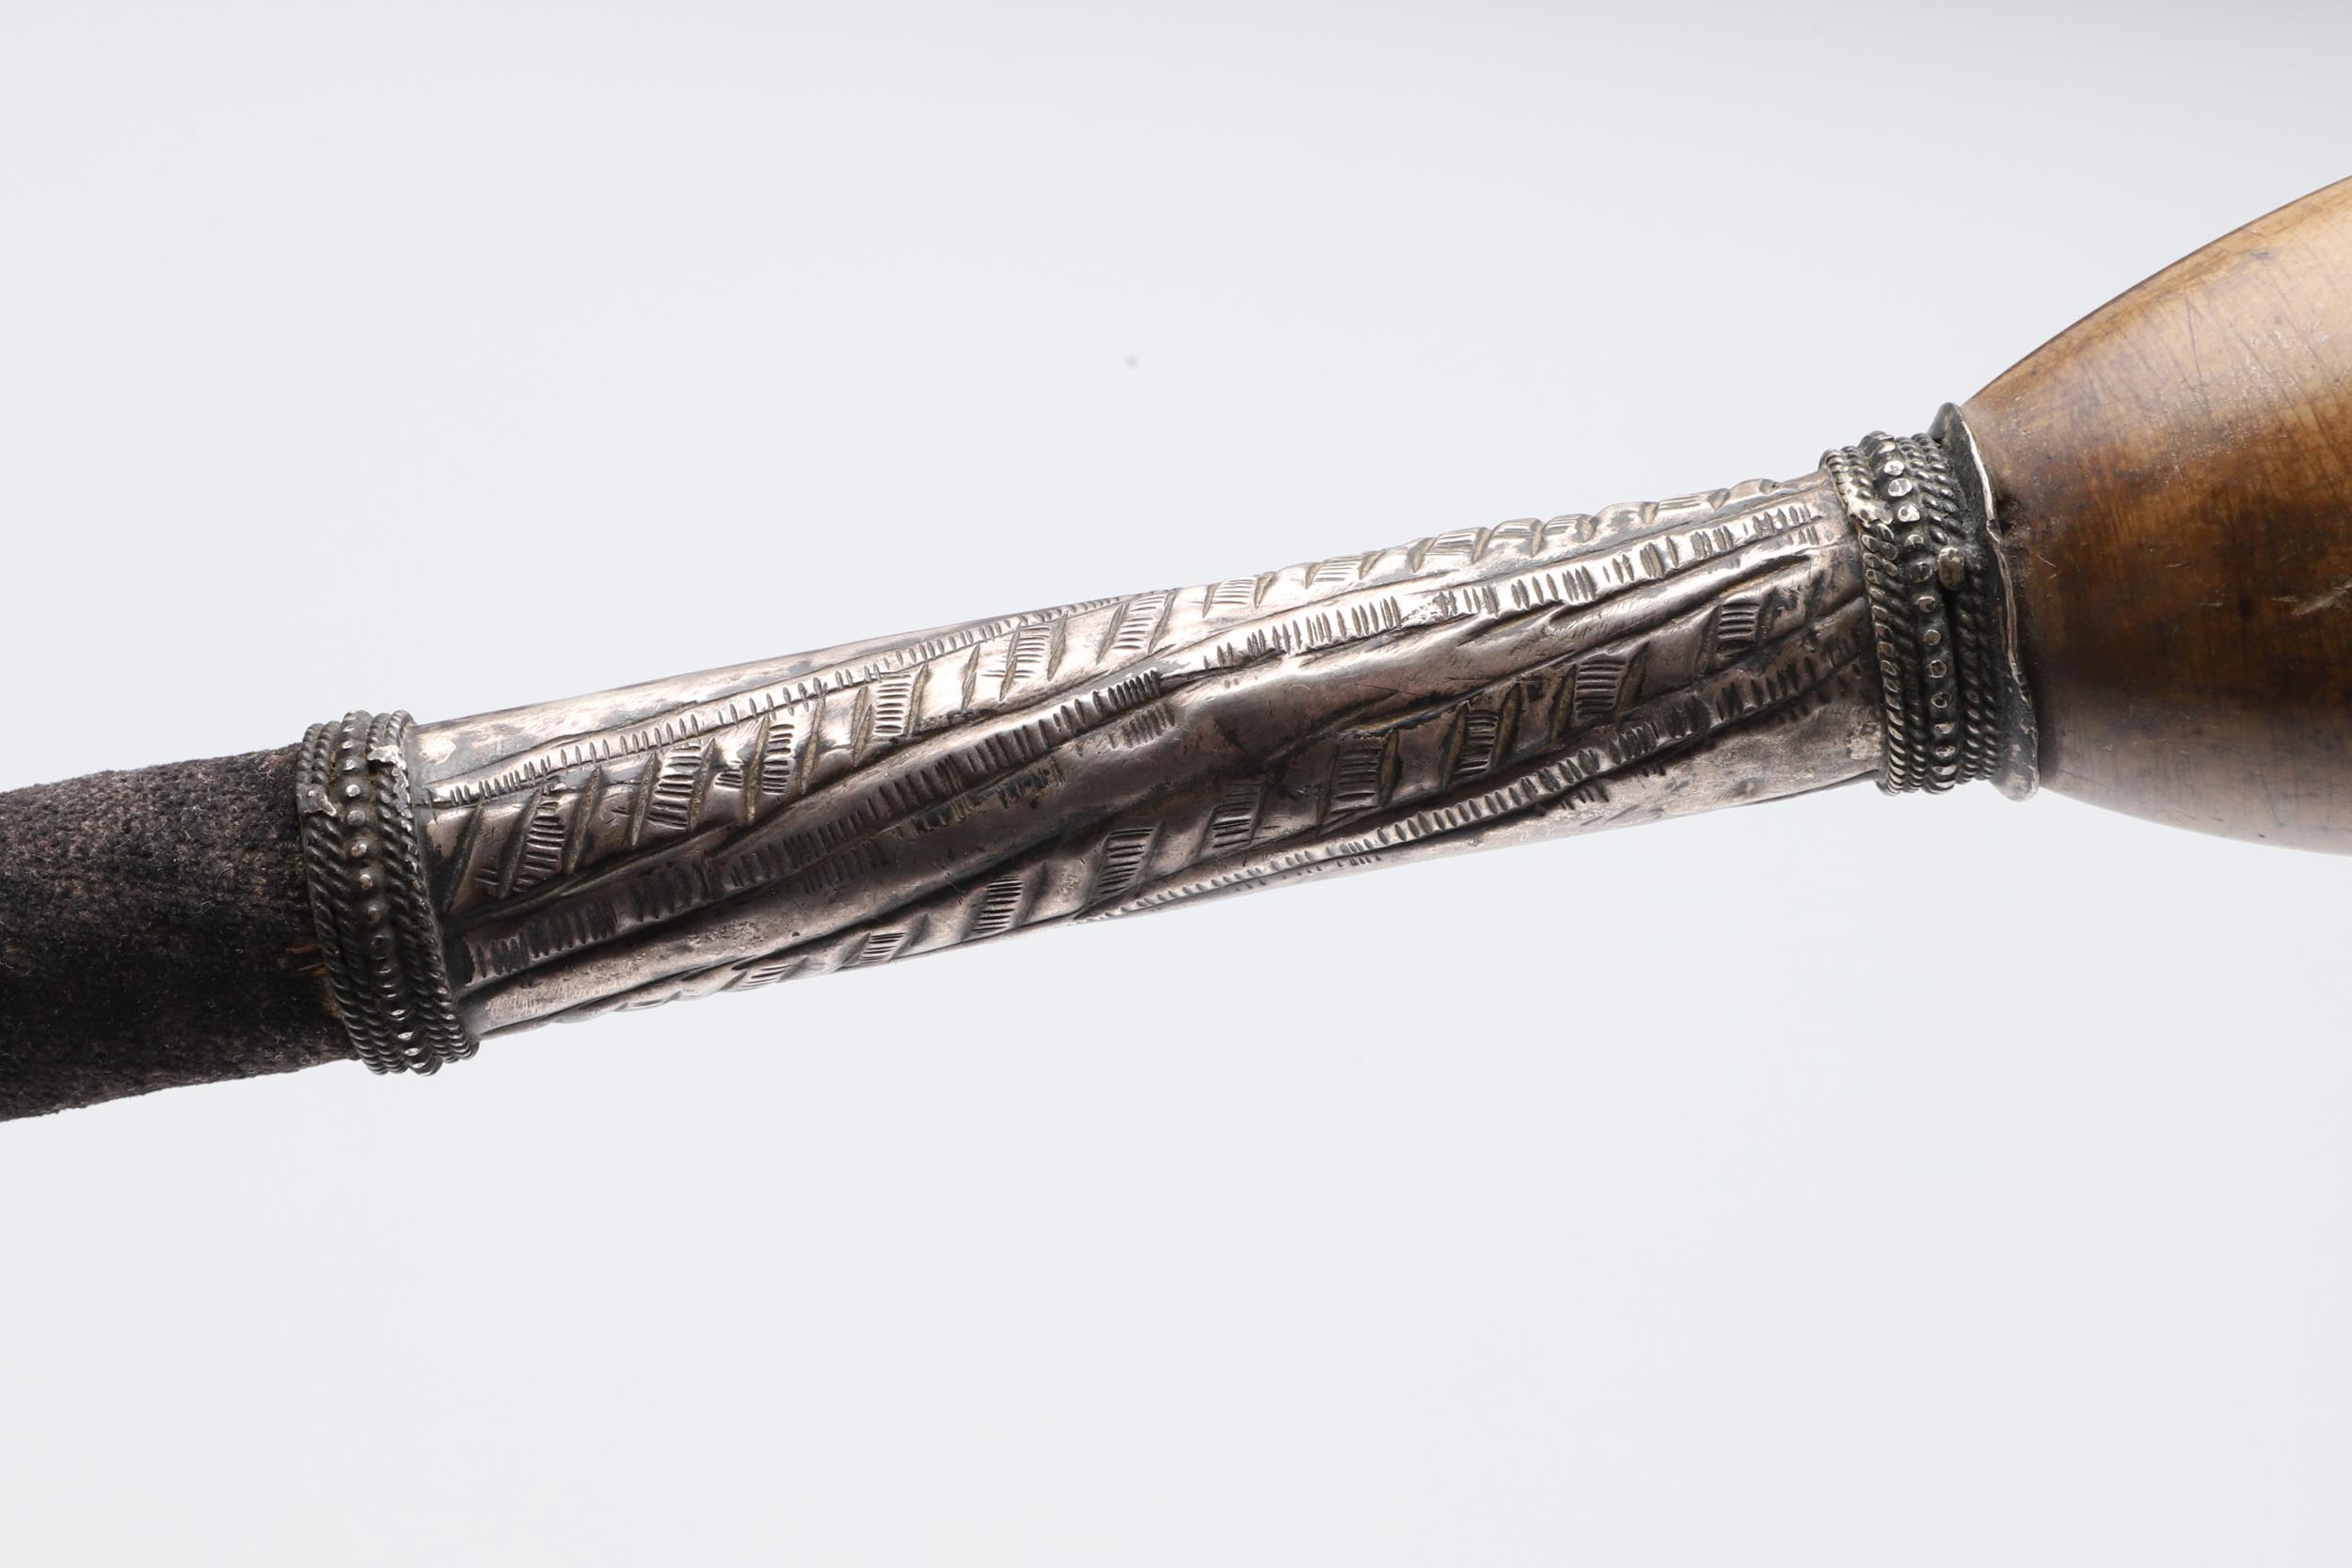 A VERY UNUSUAL SILVER MOUNTED TURKISH PUSIKAN OR GENERAL'S BATON. - Image 11 of 12